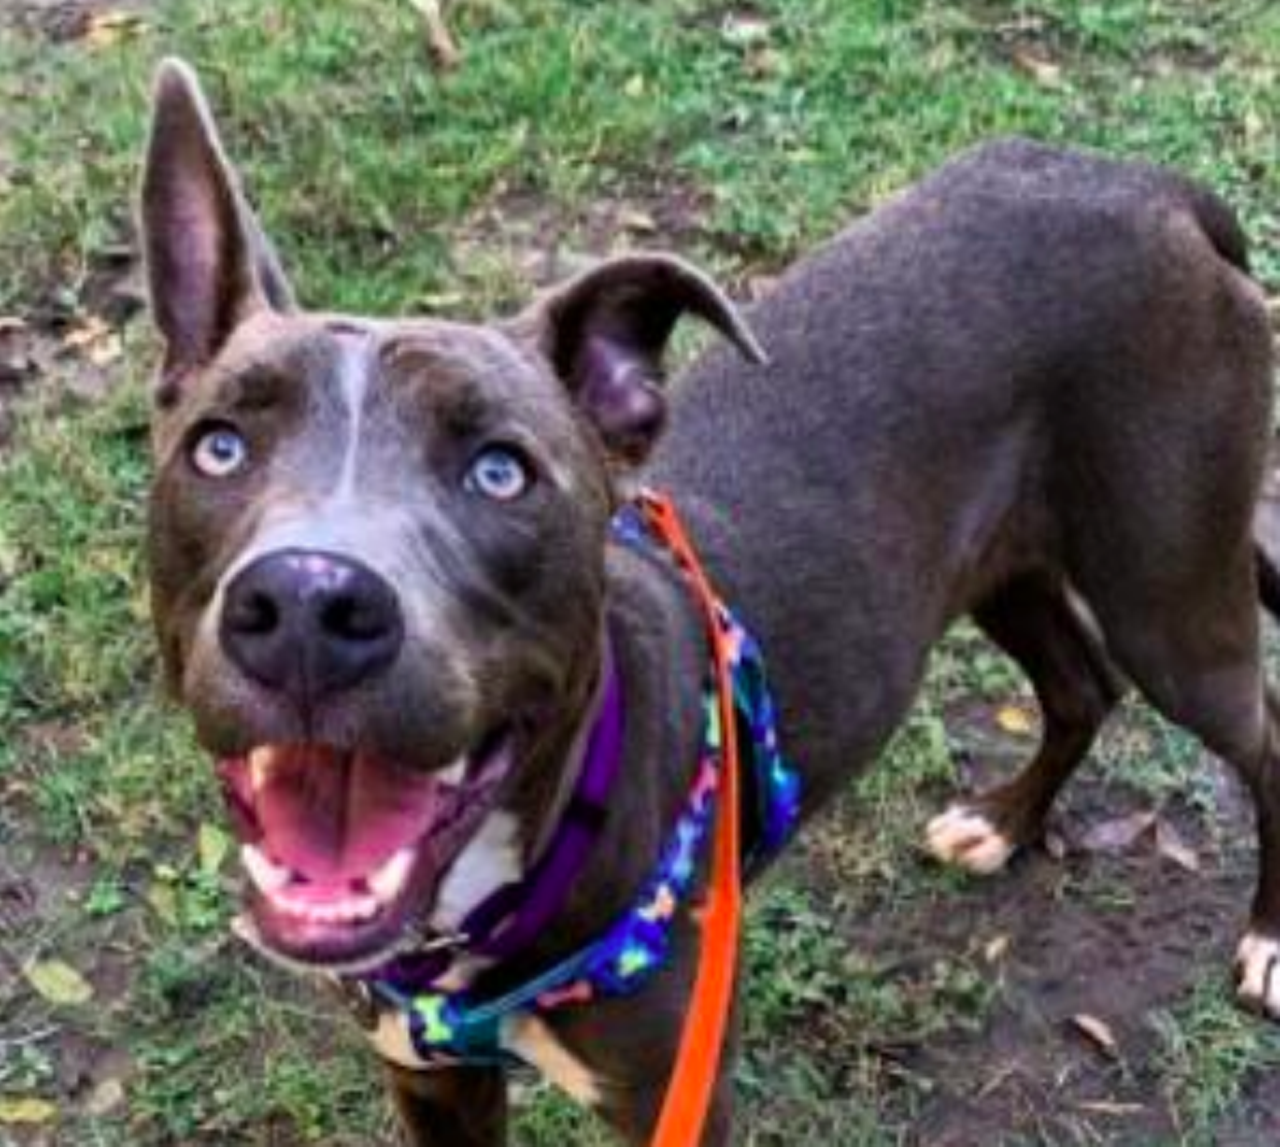 Grey
"I am a very good boy that walks very well on a leash and I am very patient during obedience training! I have lots of energy and I'll need someone that can keep up with me. Enough chatting, let's go for a walk!"